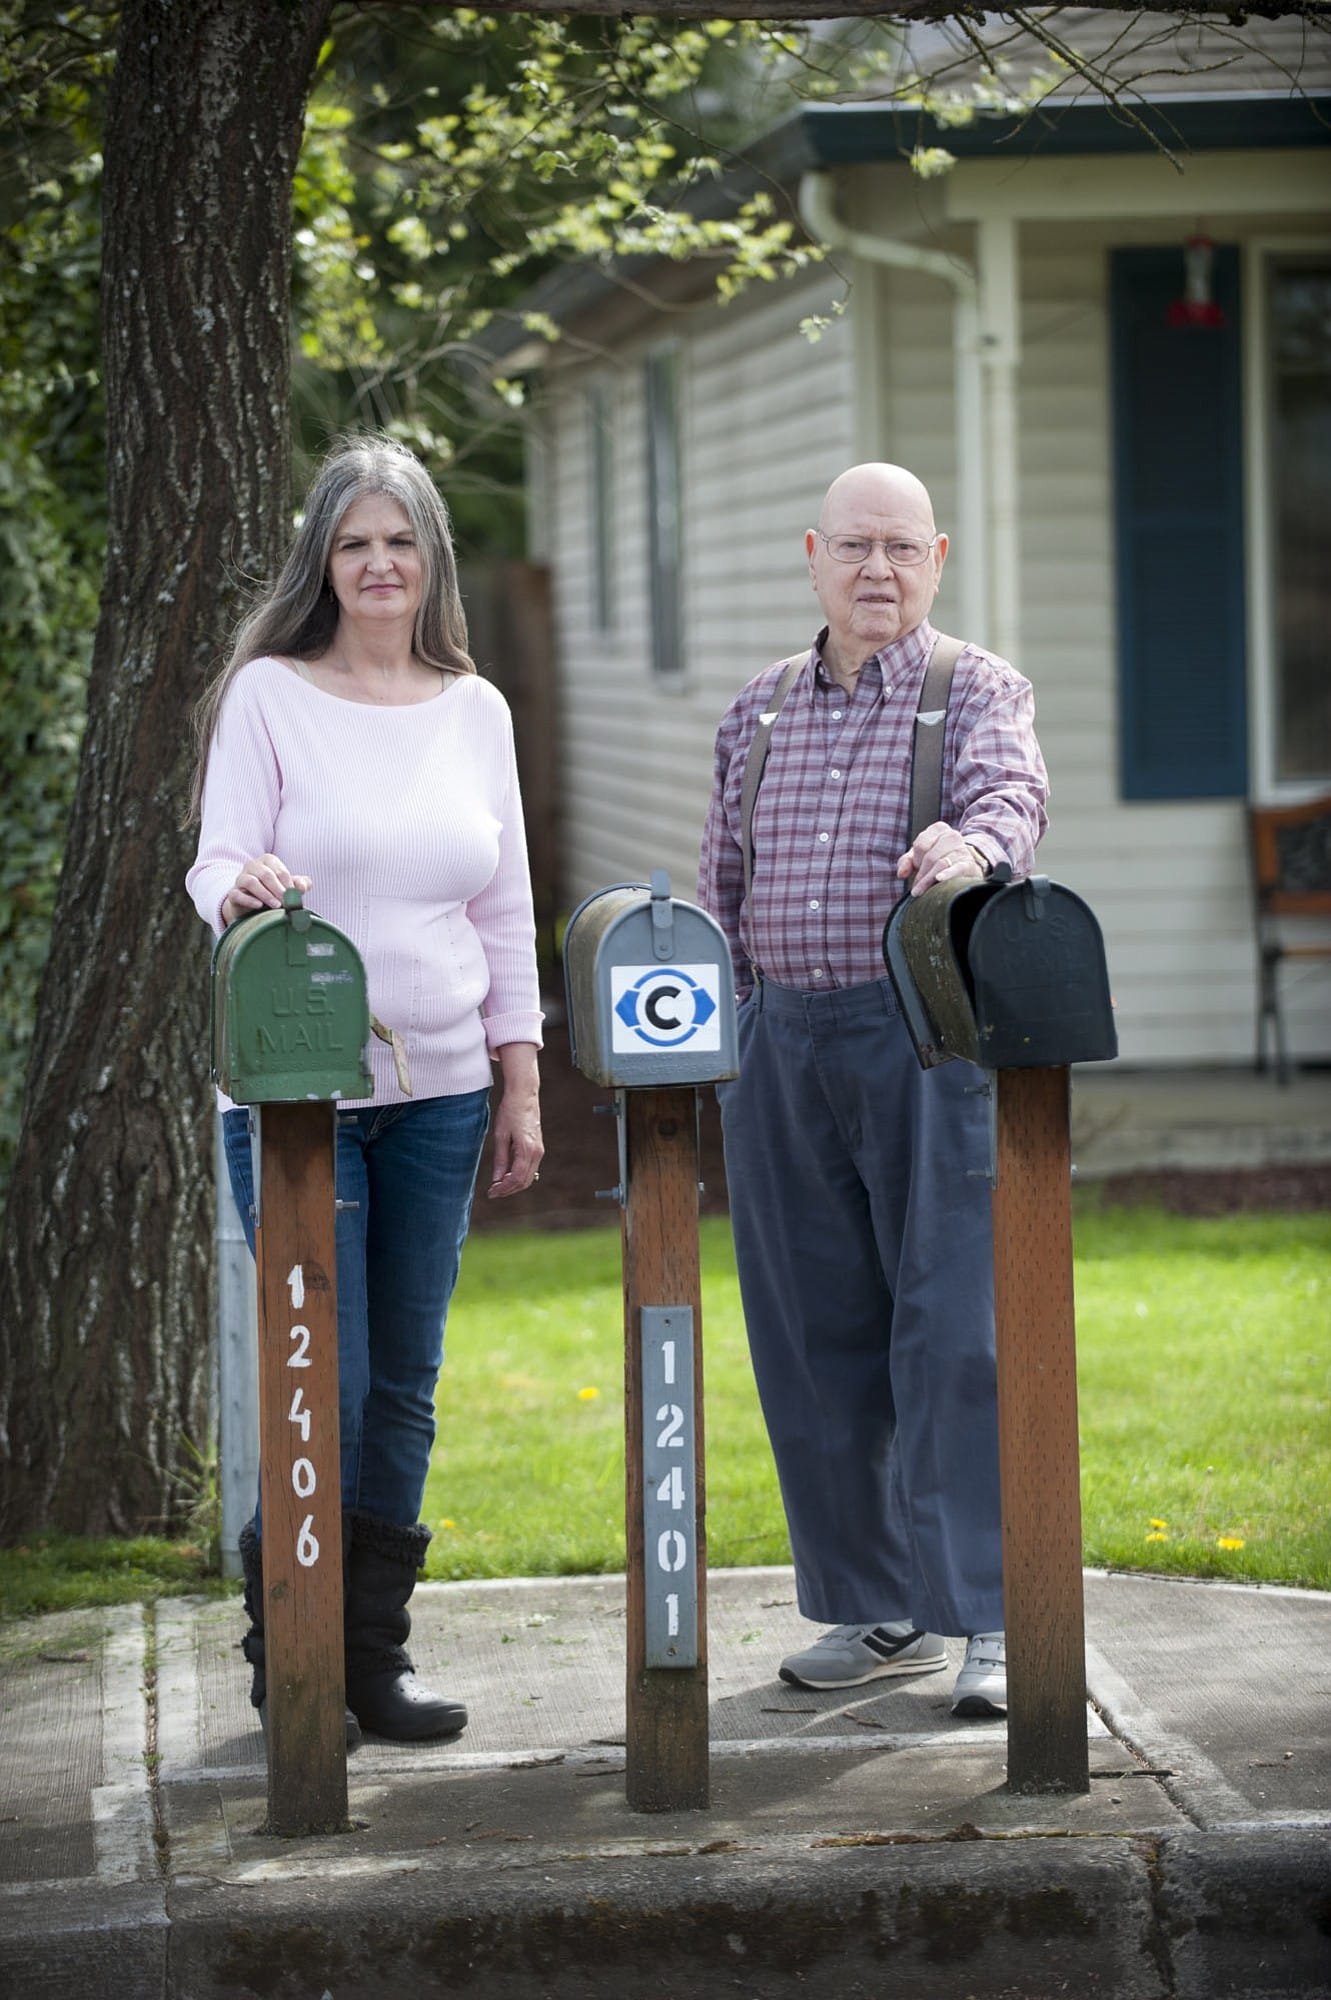 Vancouver neighbors Jo Anna Lang and George Burden say they're fed up after two years of chronic mail delivery errors in their North Image neighborhood, which is served by a constant stream of trainee carriers.